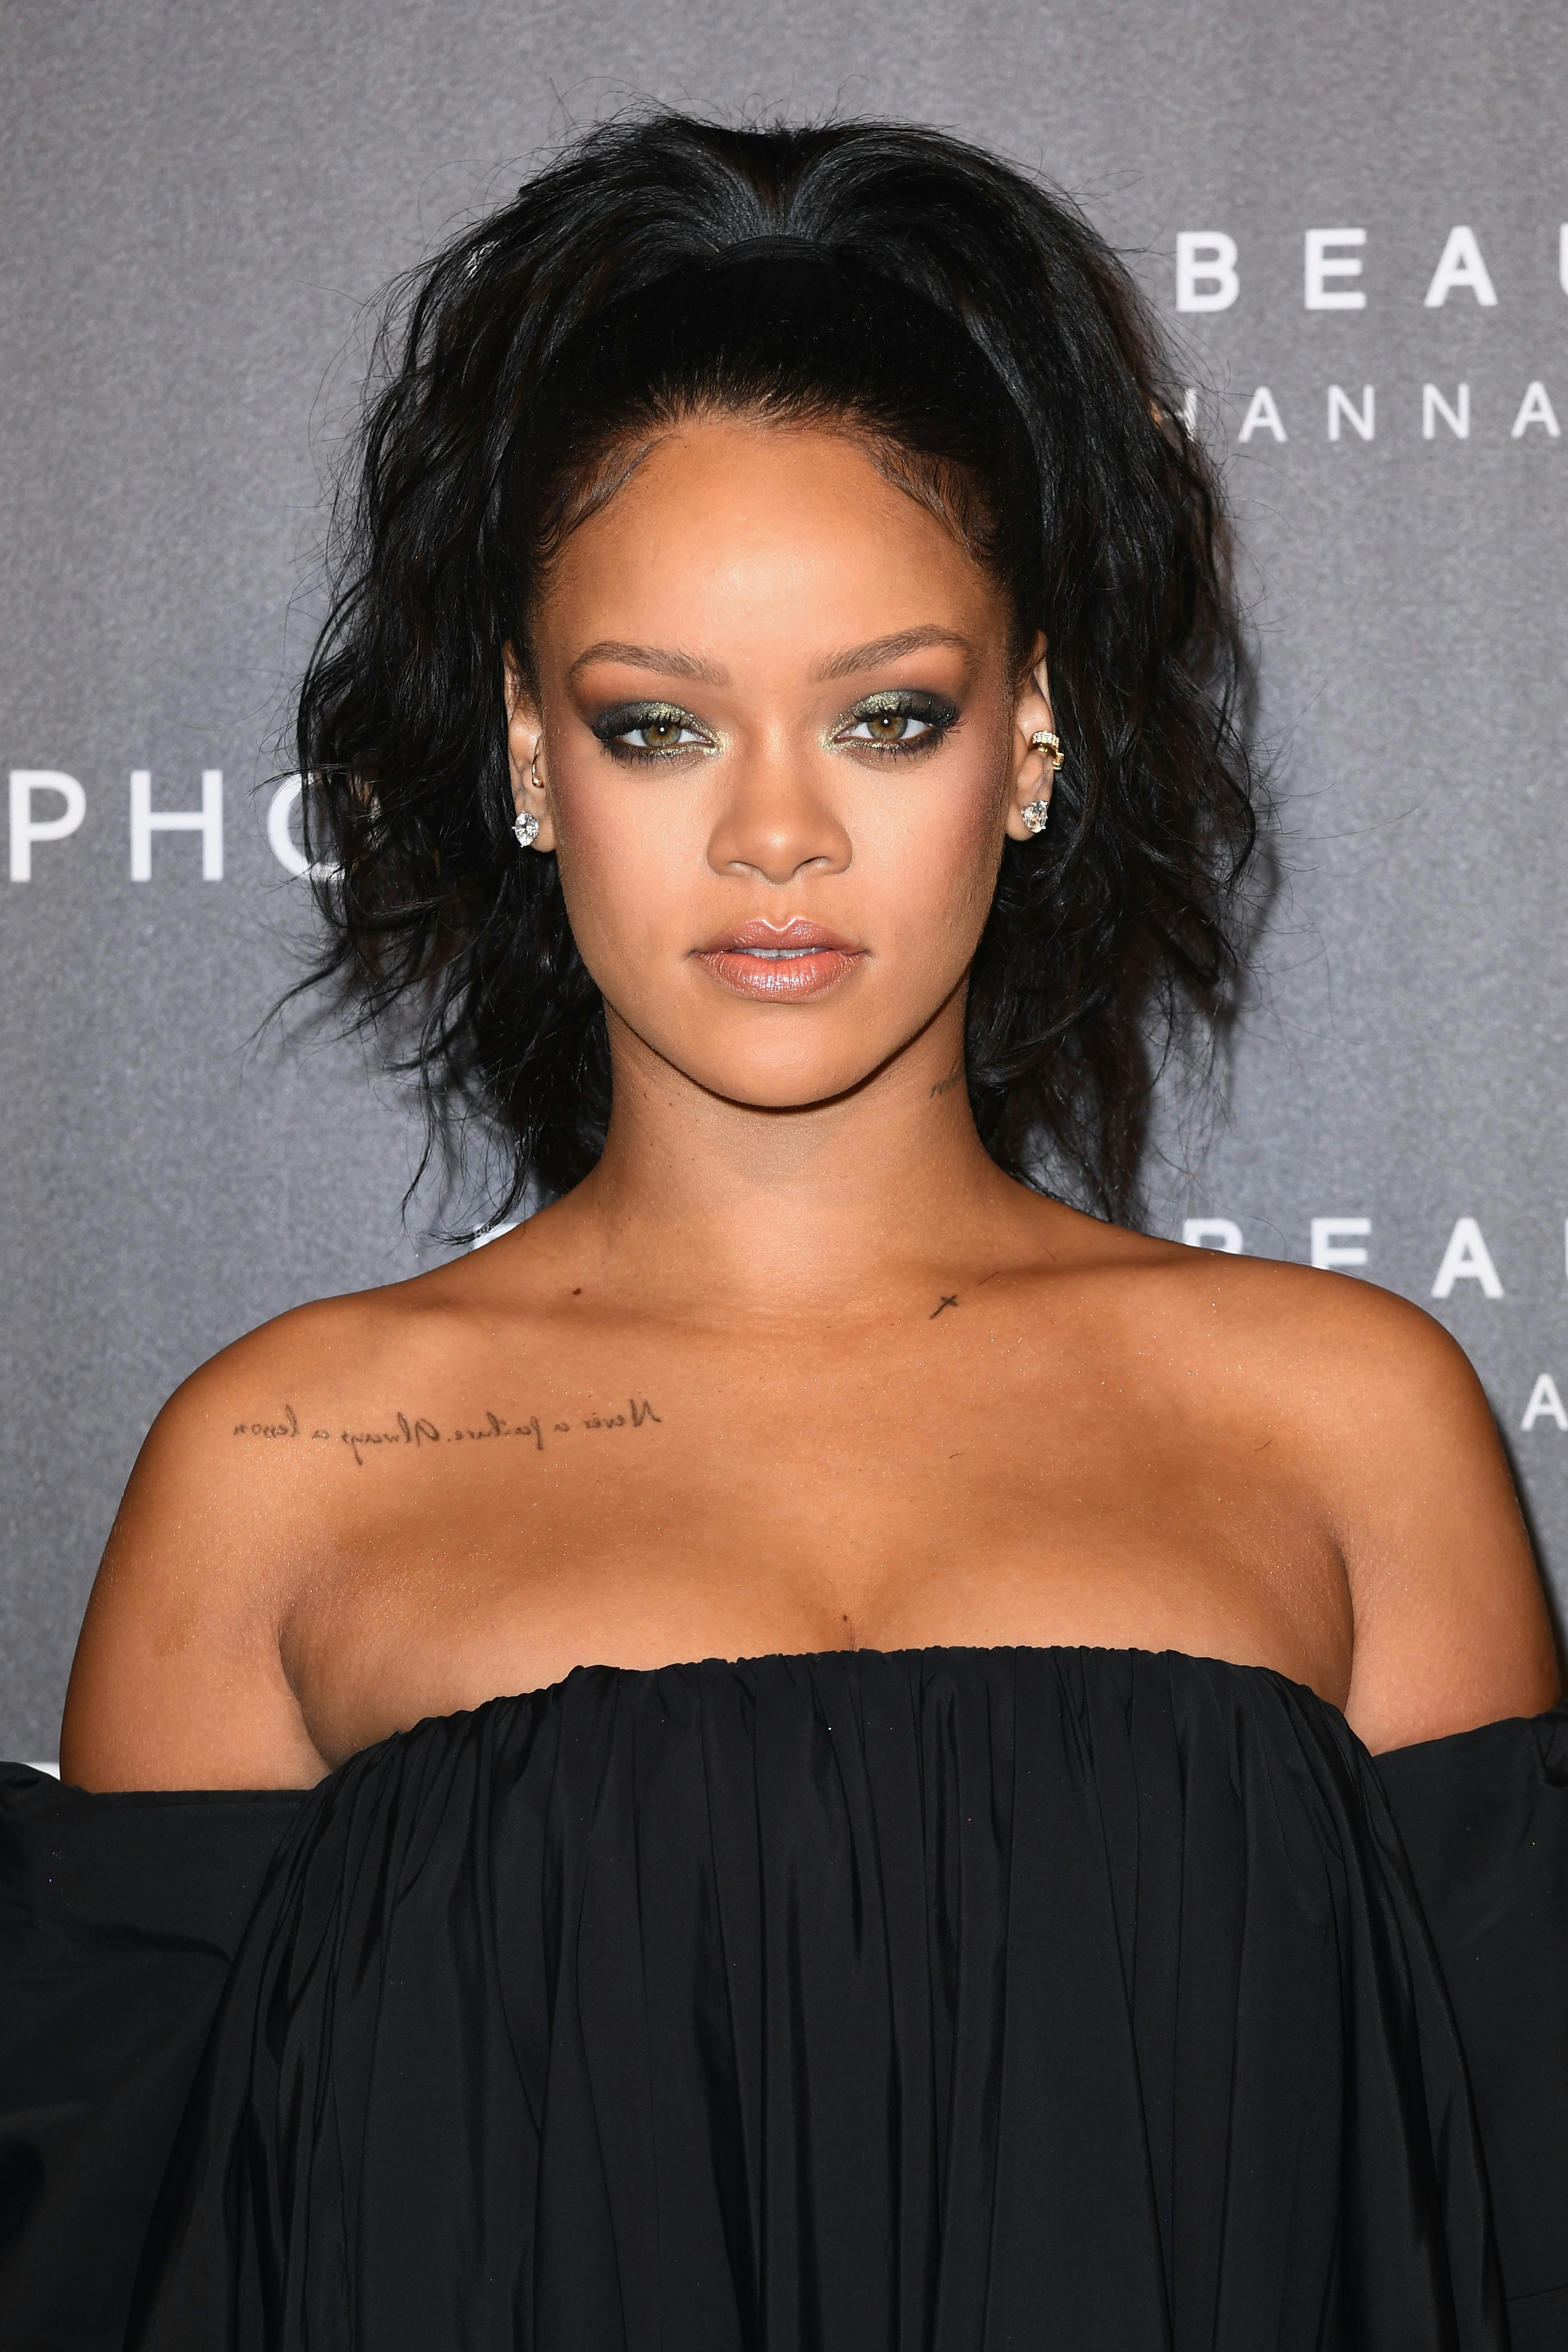 A Guide to Rihannas Tattoos and What They Mean